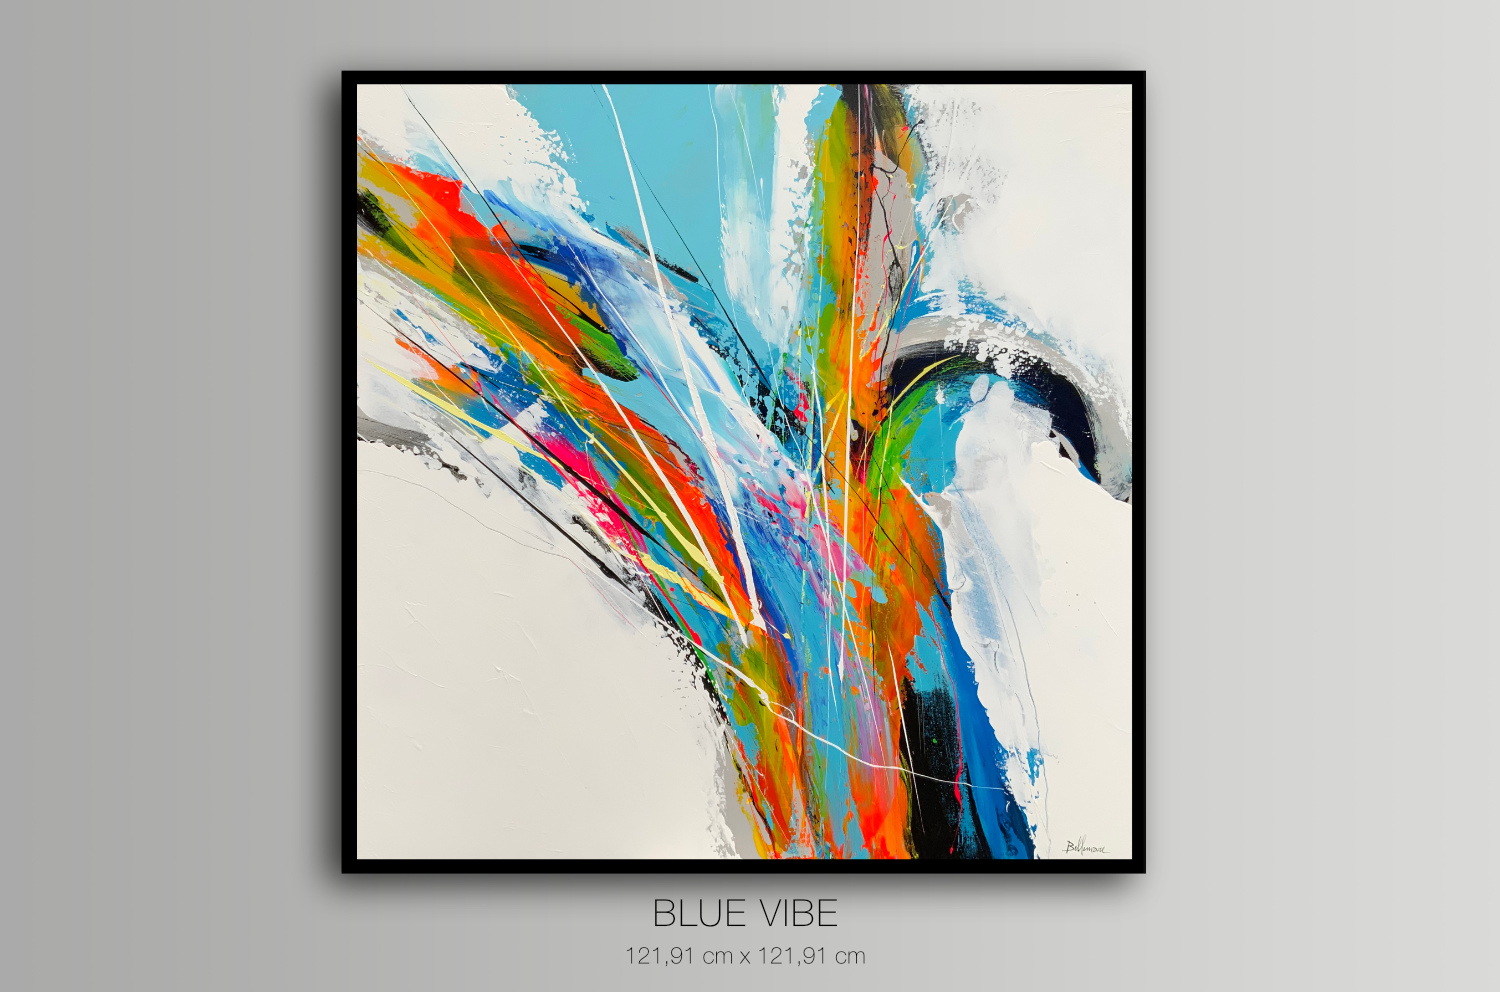 Blue Vibe - Featured